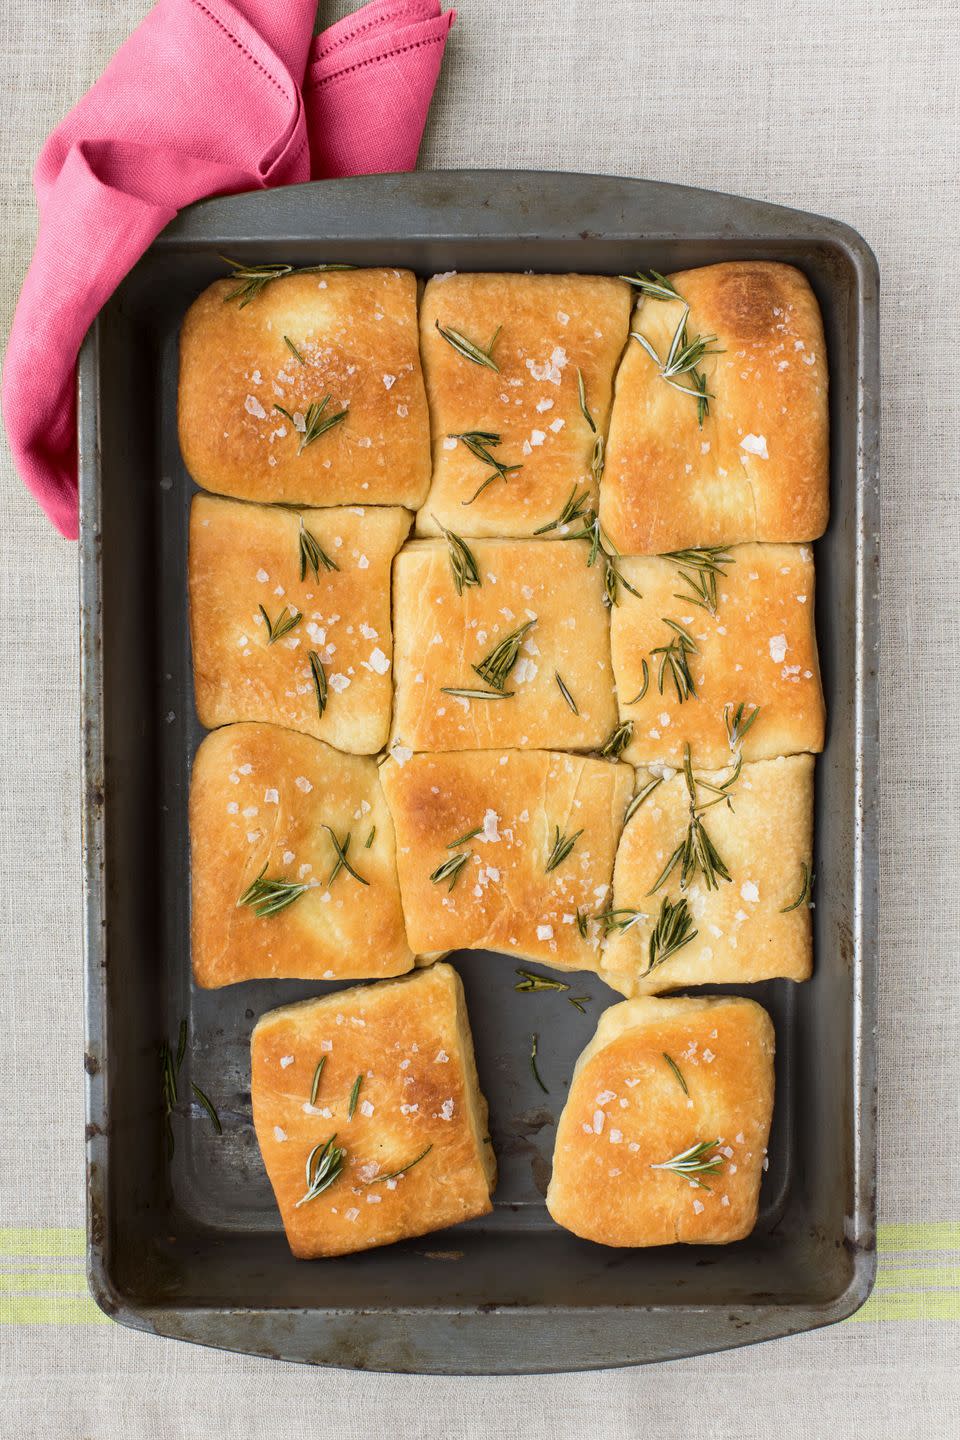 Buttery Rosemary Rolls